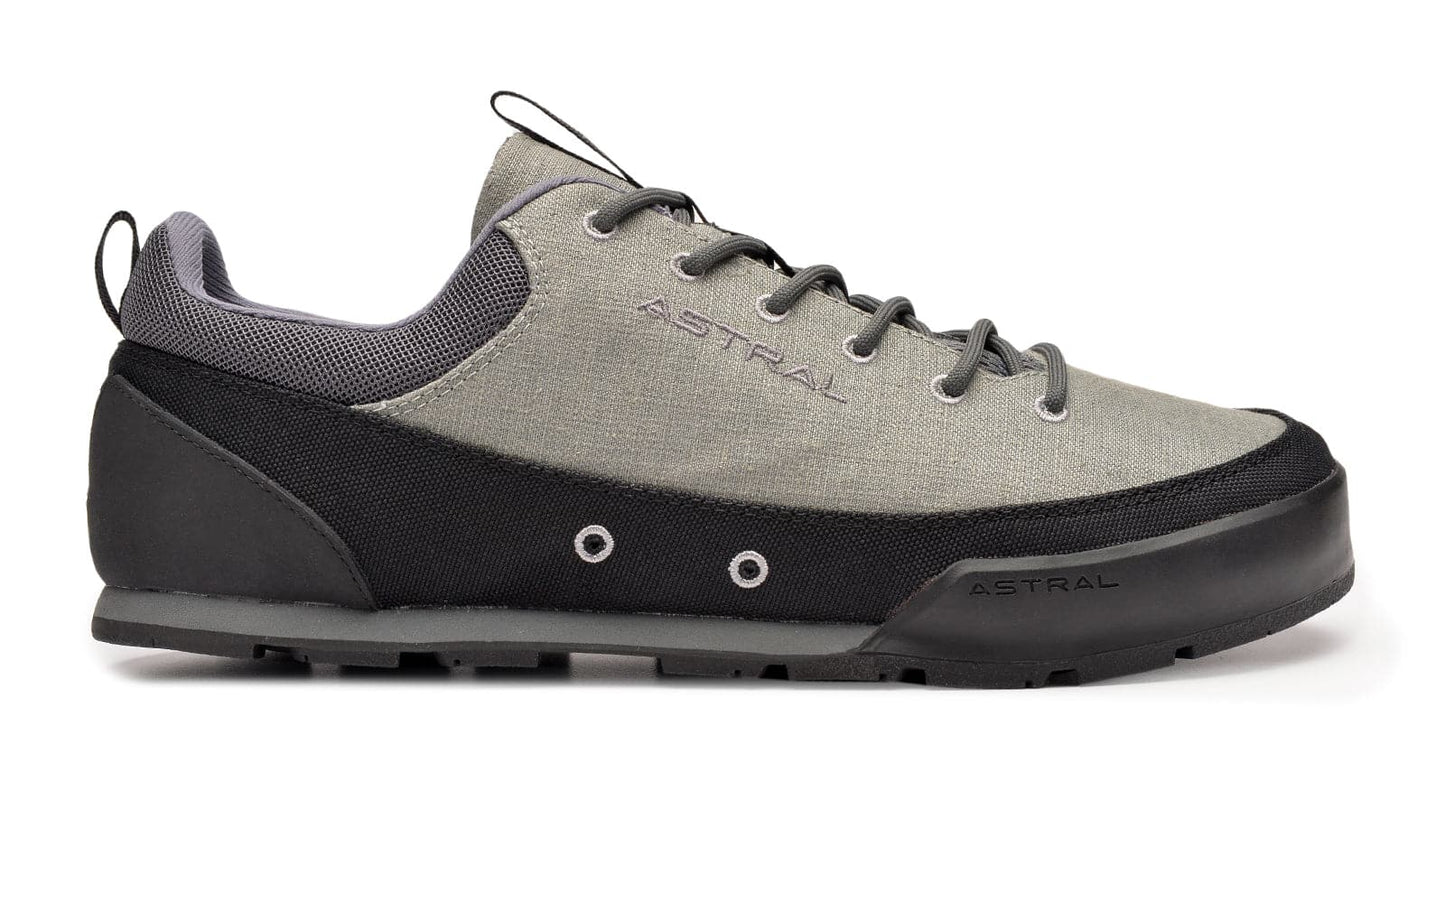 Featuring the Rambler - Men's casual shoe, men's footwear manufactured by Astral shown here from a second angle.